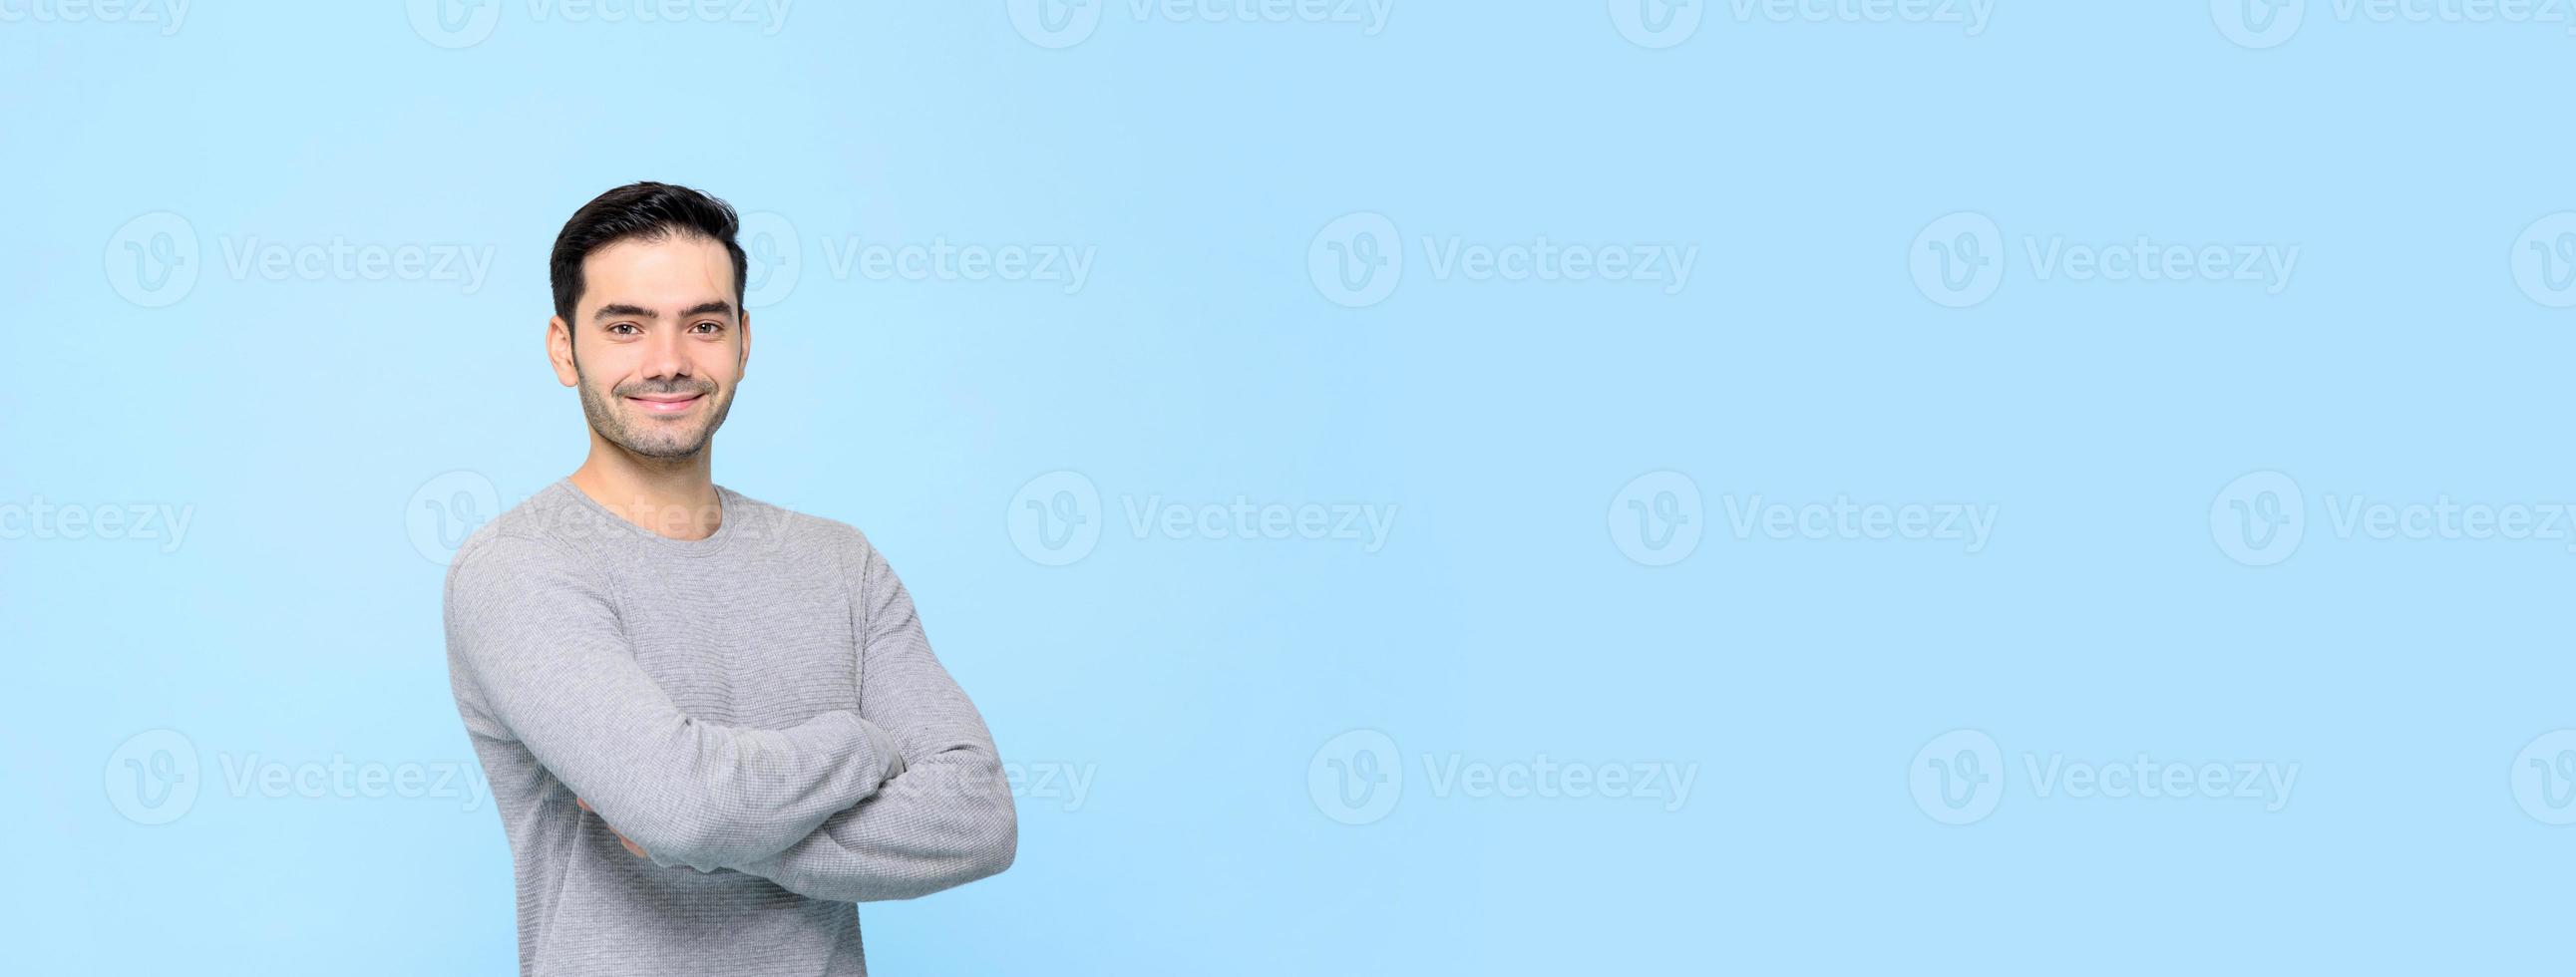 Portrait of smiling friendly handsome man in plain gray t-shirt with arms crossed isolated in light blue banner bakground with copy space photo